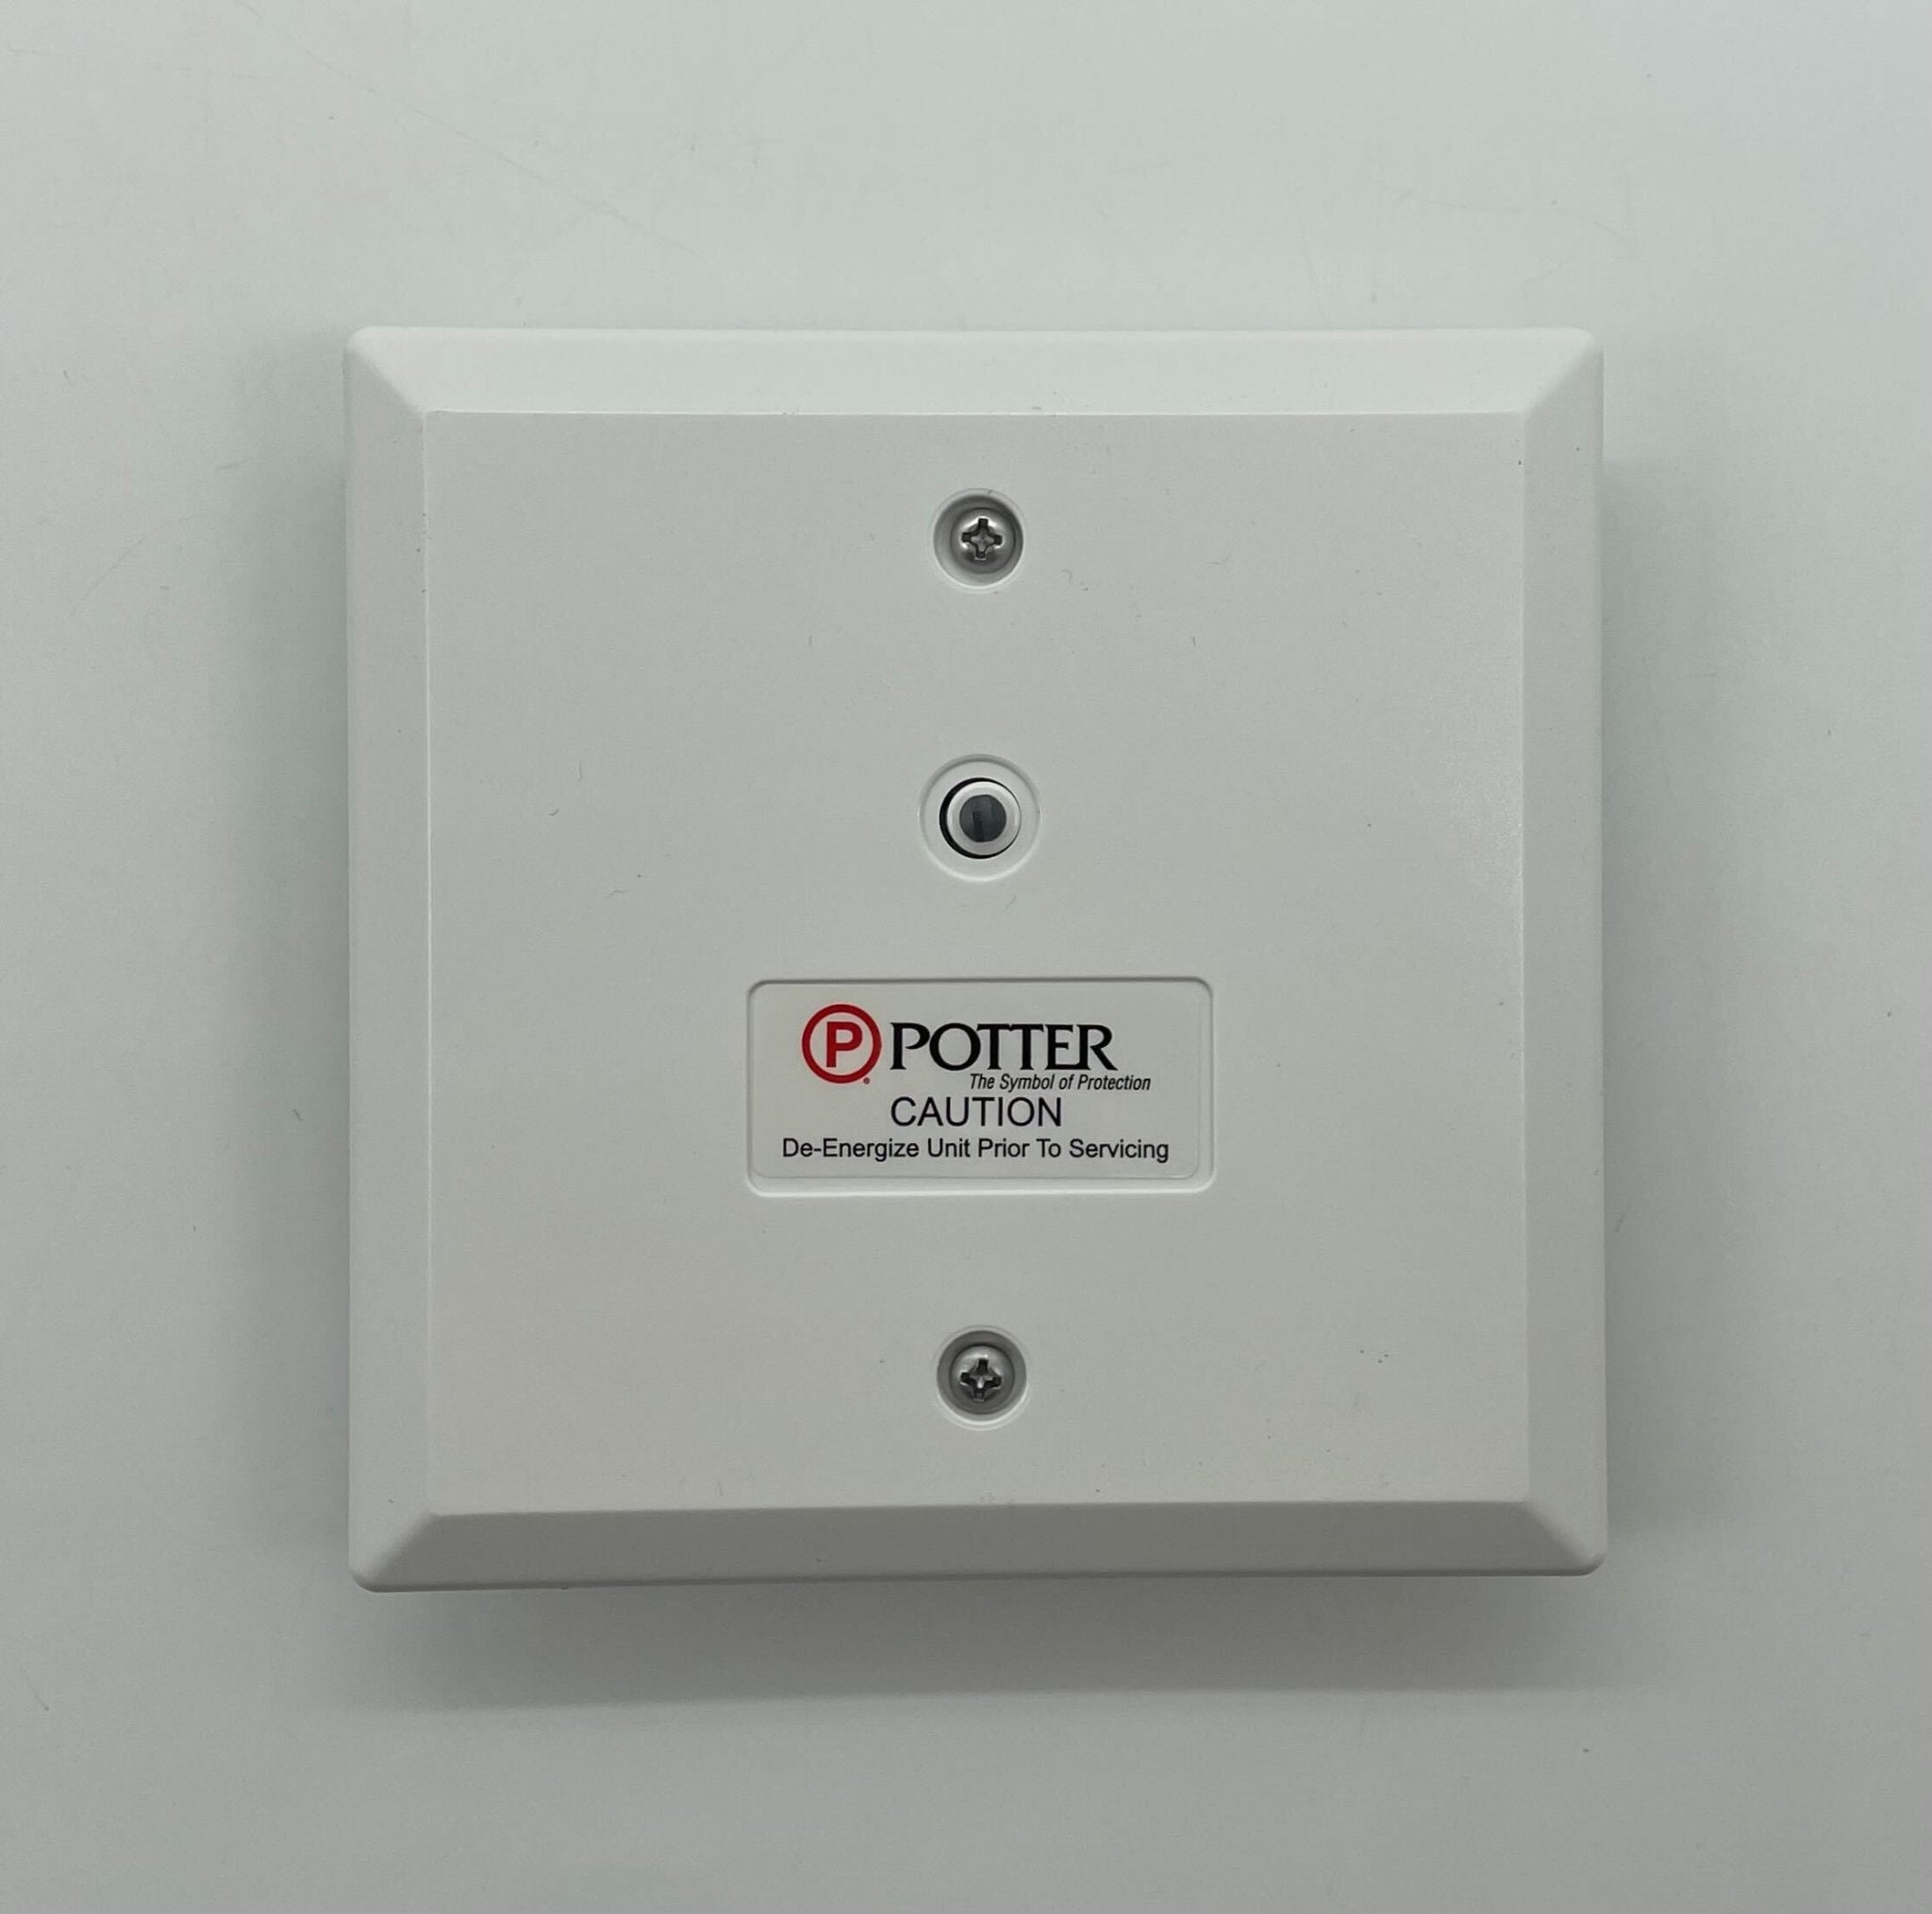 Potter PAD100-NAC - The Fire Alarm Supplier